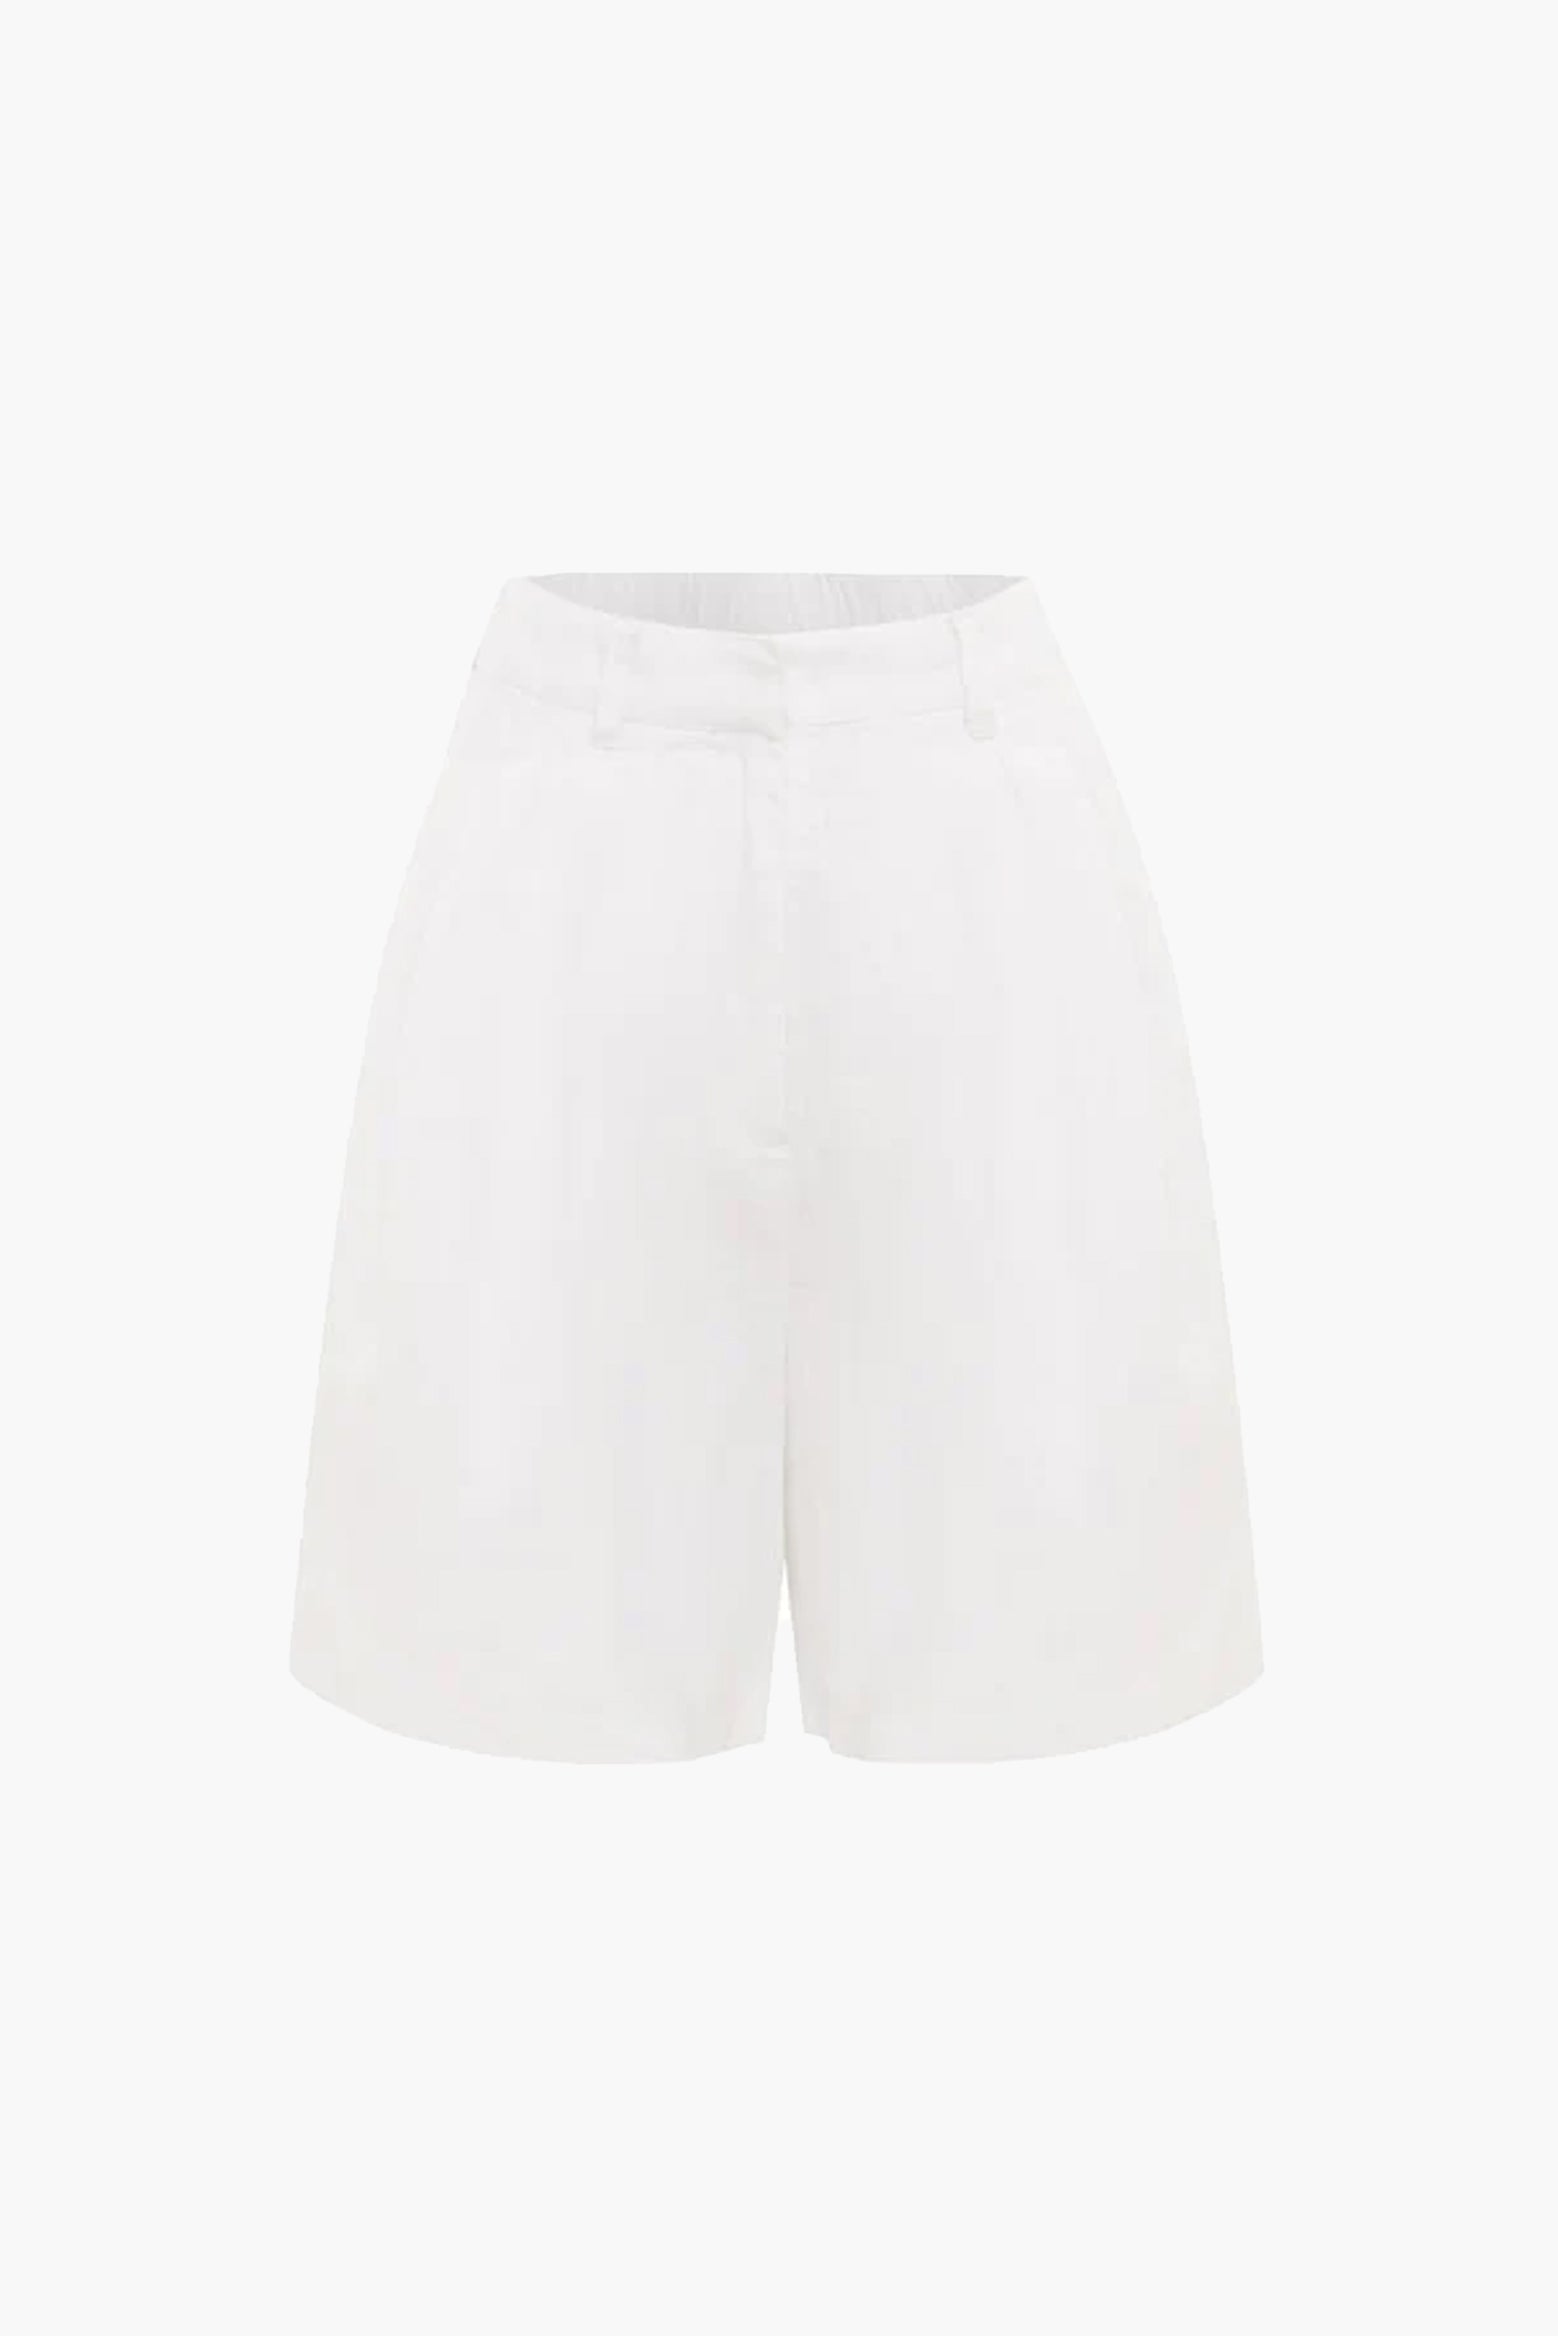 Posse Marchello Short in Ivory available at The New Trend Australia.